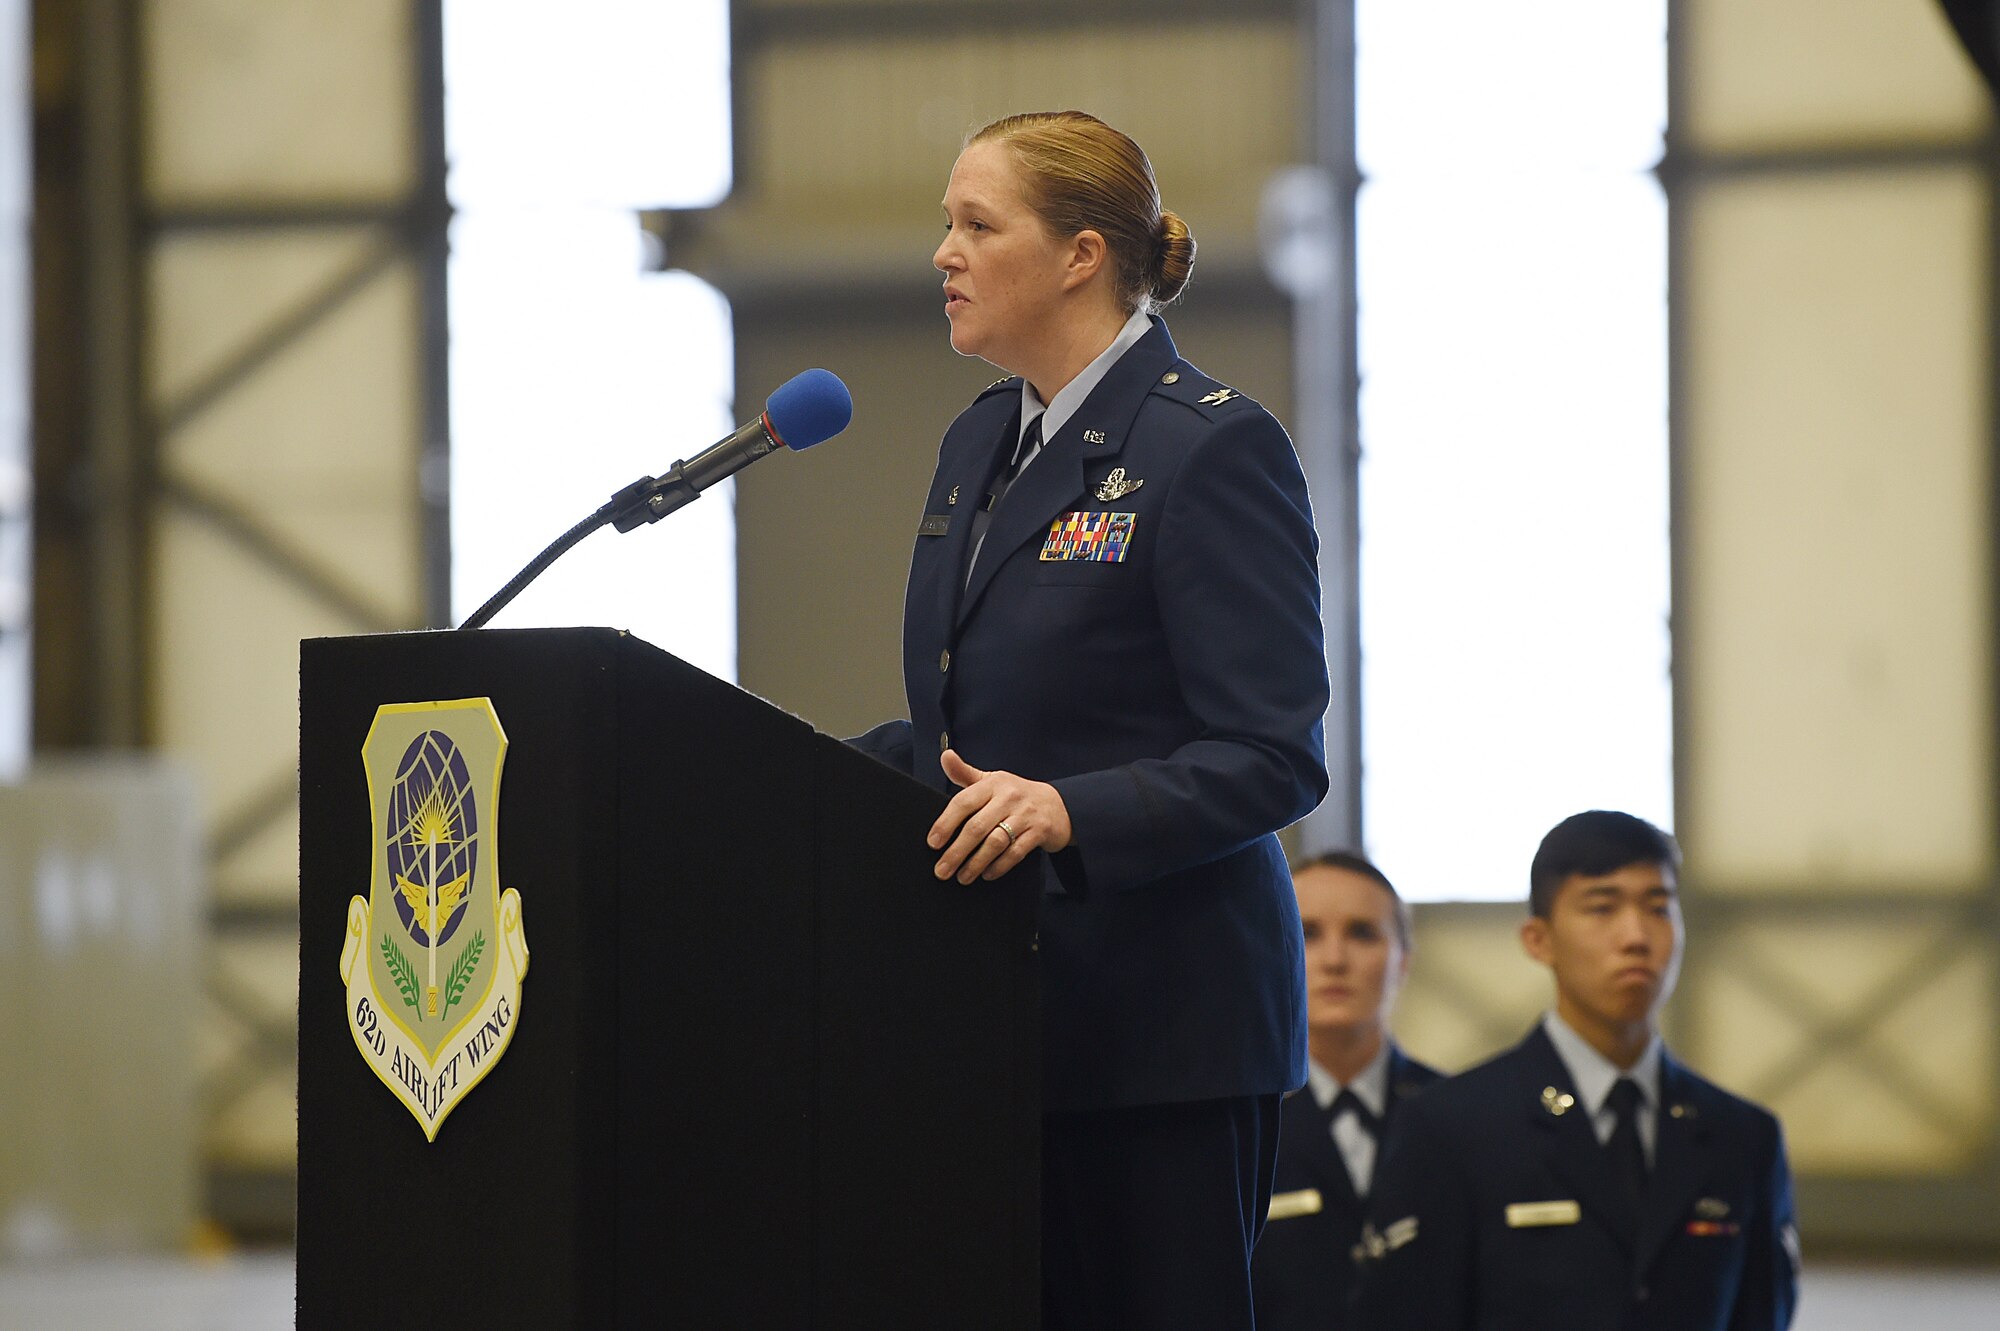 Col. Erin Staine-Pyne, 62nd Airlift Wing commander, speaks for the first time as the 62nd Airlift Wing commander to audience members at the change of command ceremony on Joint Base Lewis-McChord, Wash., Jan 10, 2020.